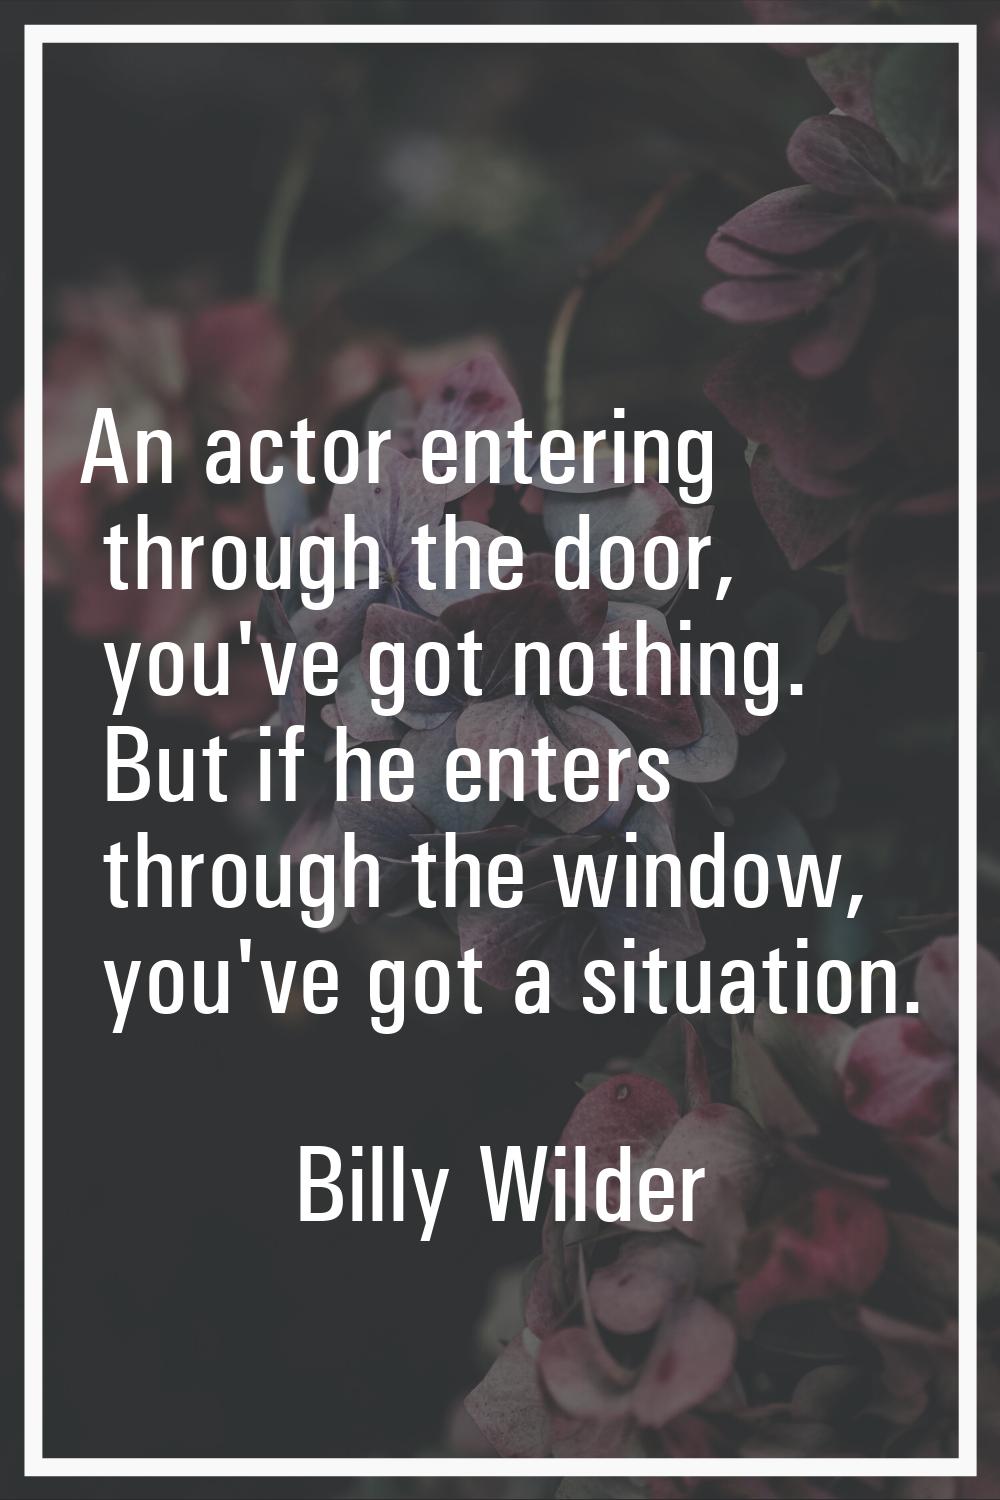 An actor entering through the door, you've got nothing. But if he enters through the window, you've